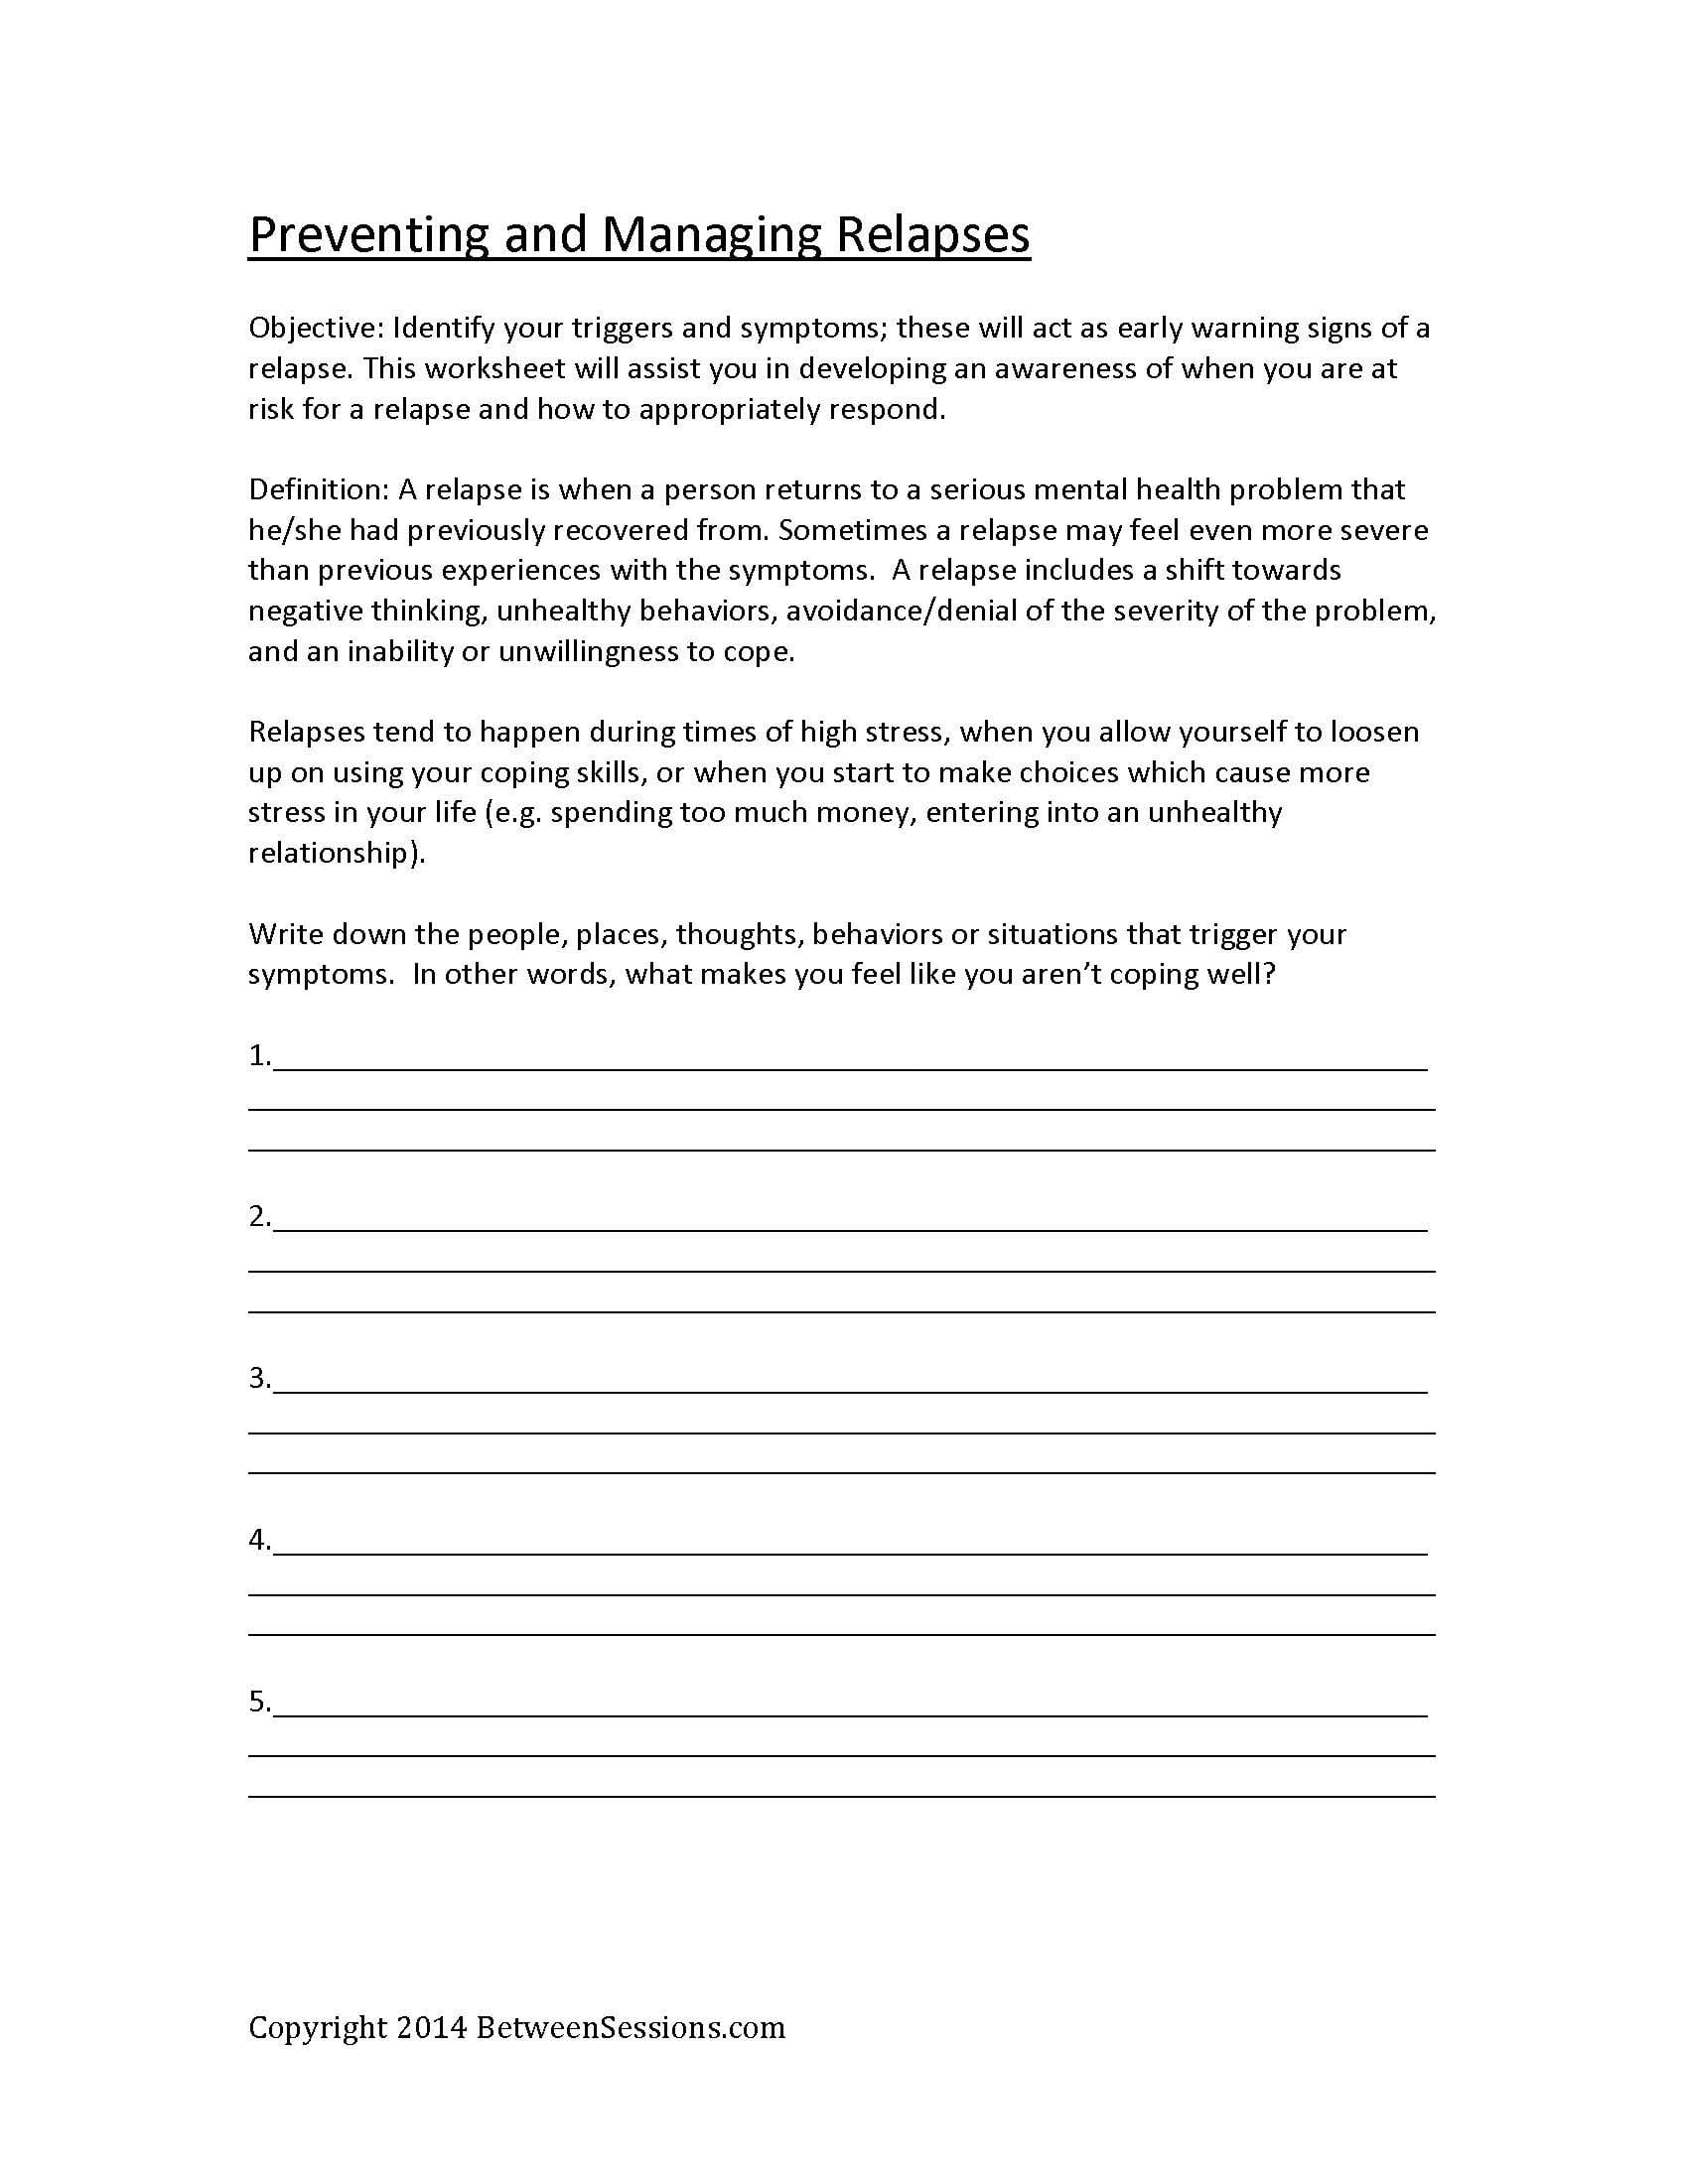 Between Sessions Mental Health Worksheets For Adults  Cognitive As Well As Dealing With Grief Worksheets